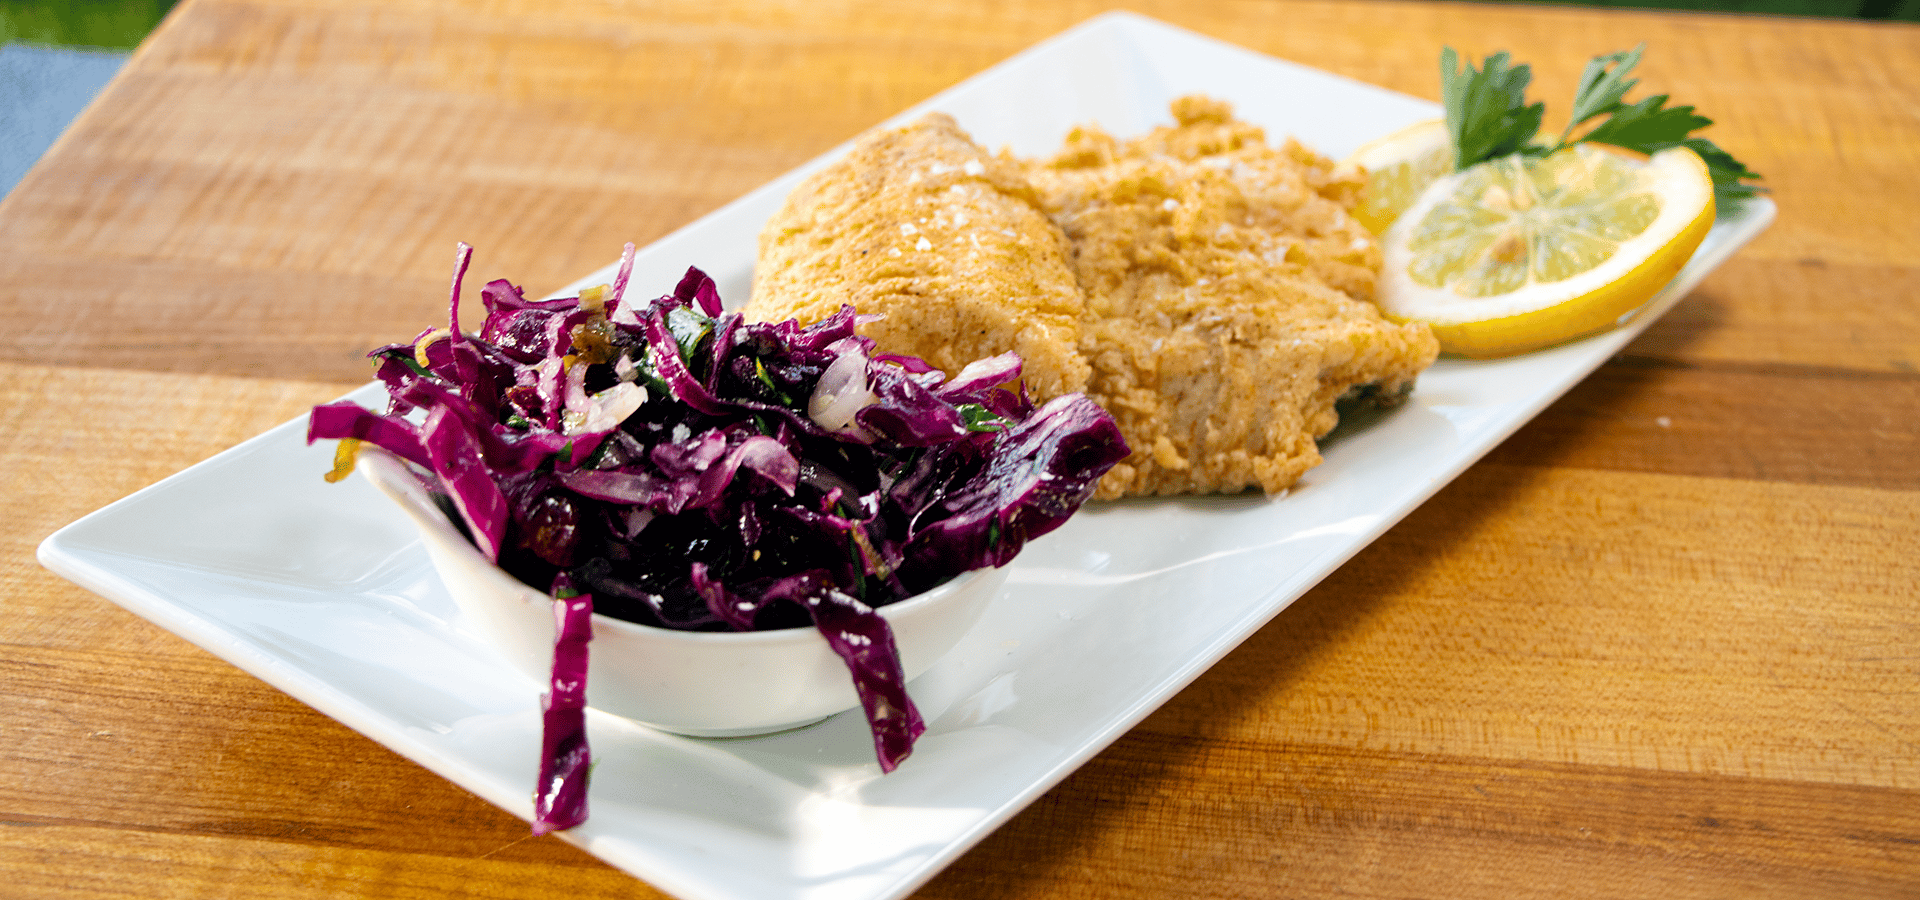 gluten free dairy free crimson coleslaw and fried fish full 03